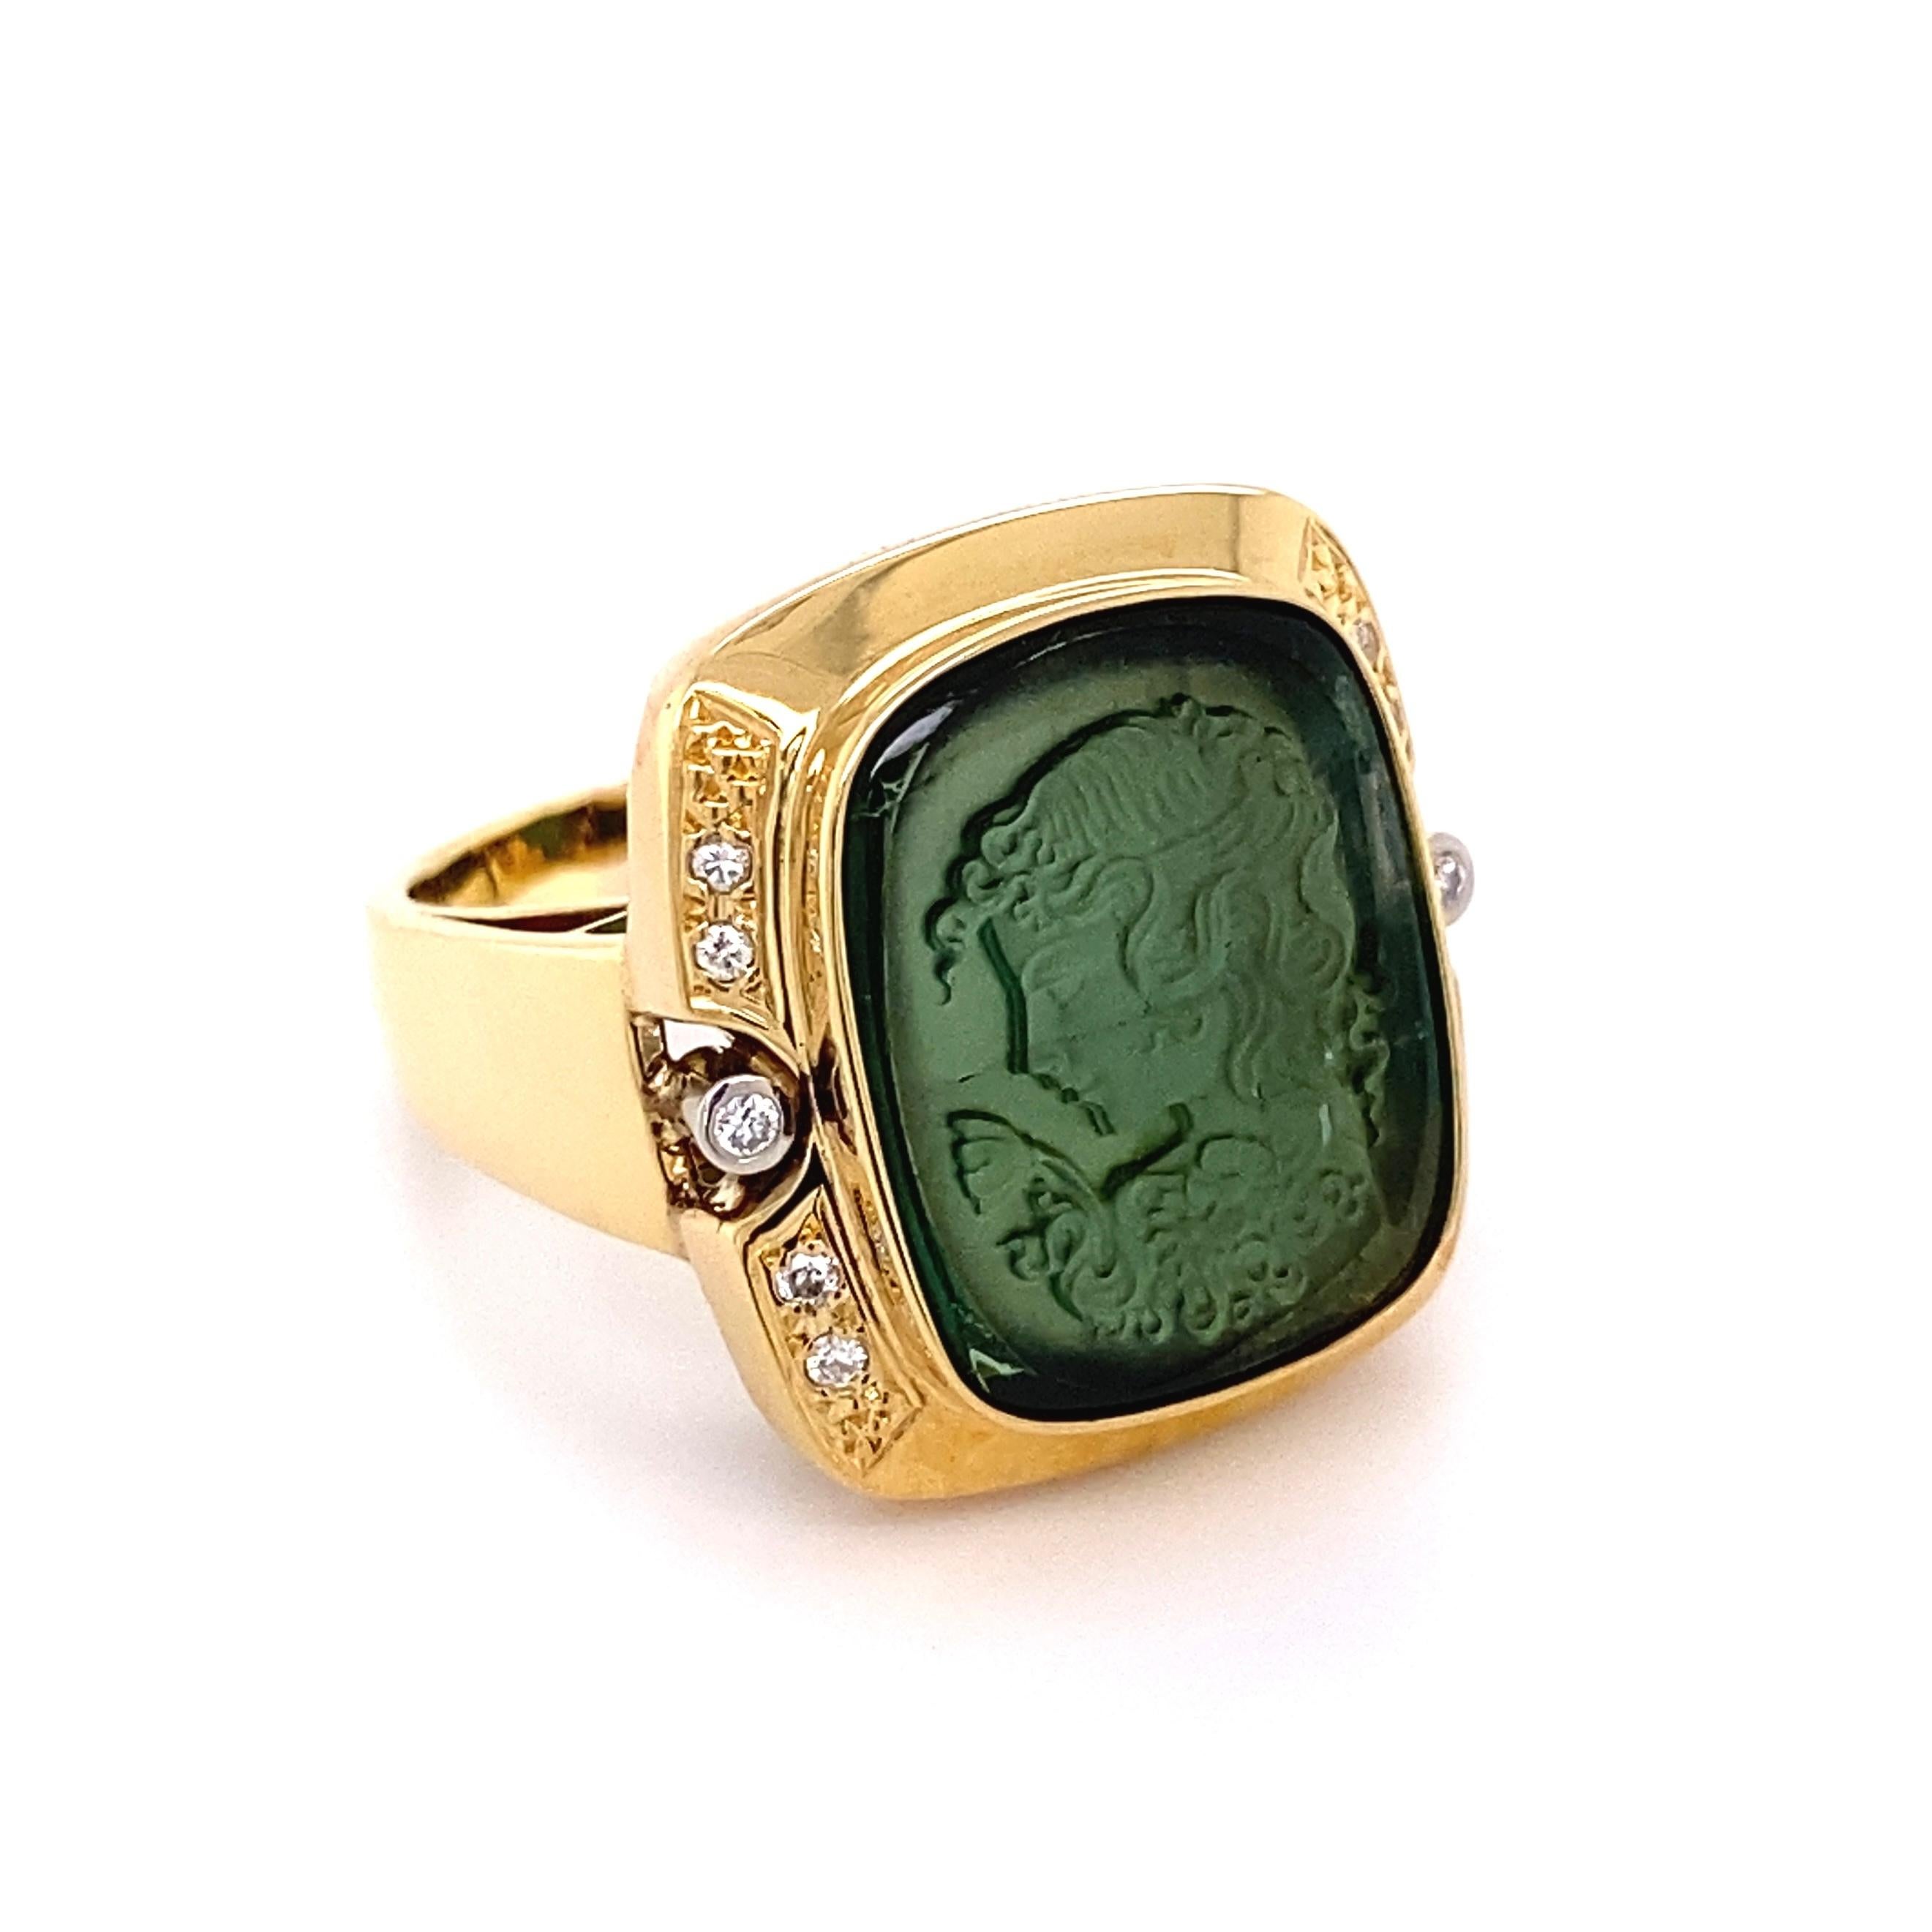 Simply Beautiful and finely detailed Tourmaline, subtly Hand carved Lady's face, securely nestled in center and enhanced either side with Diamonds, weighing approx. 0.11 total carat weight. Diamonds Bezel set in Platinum. Hand crafted in 18 Karat